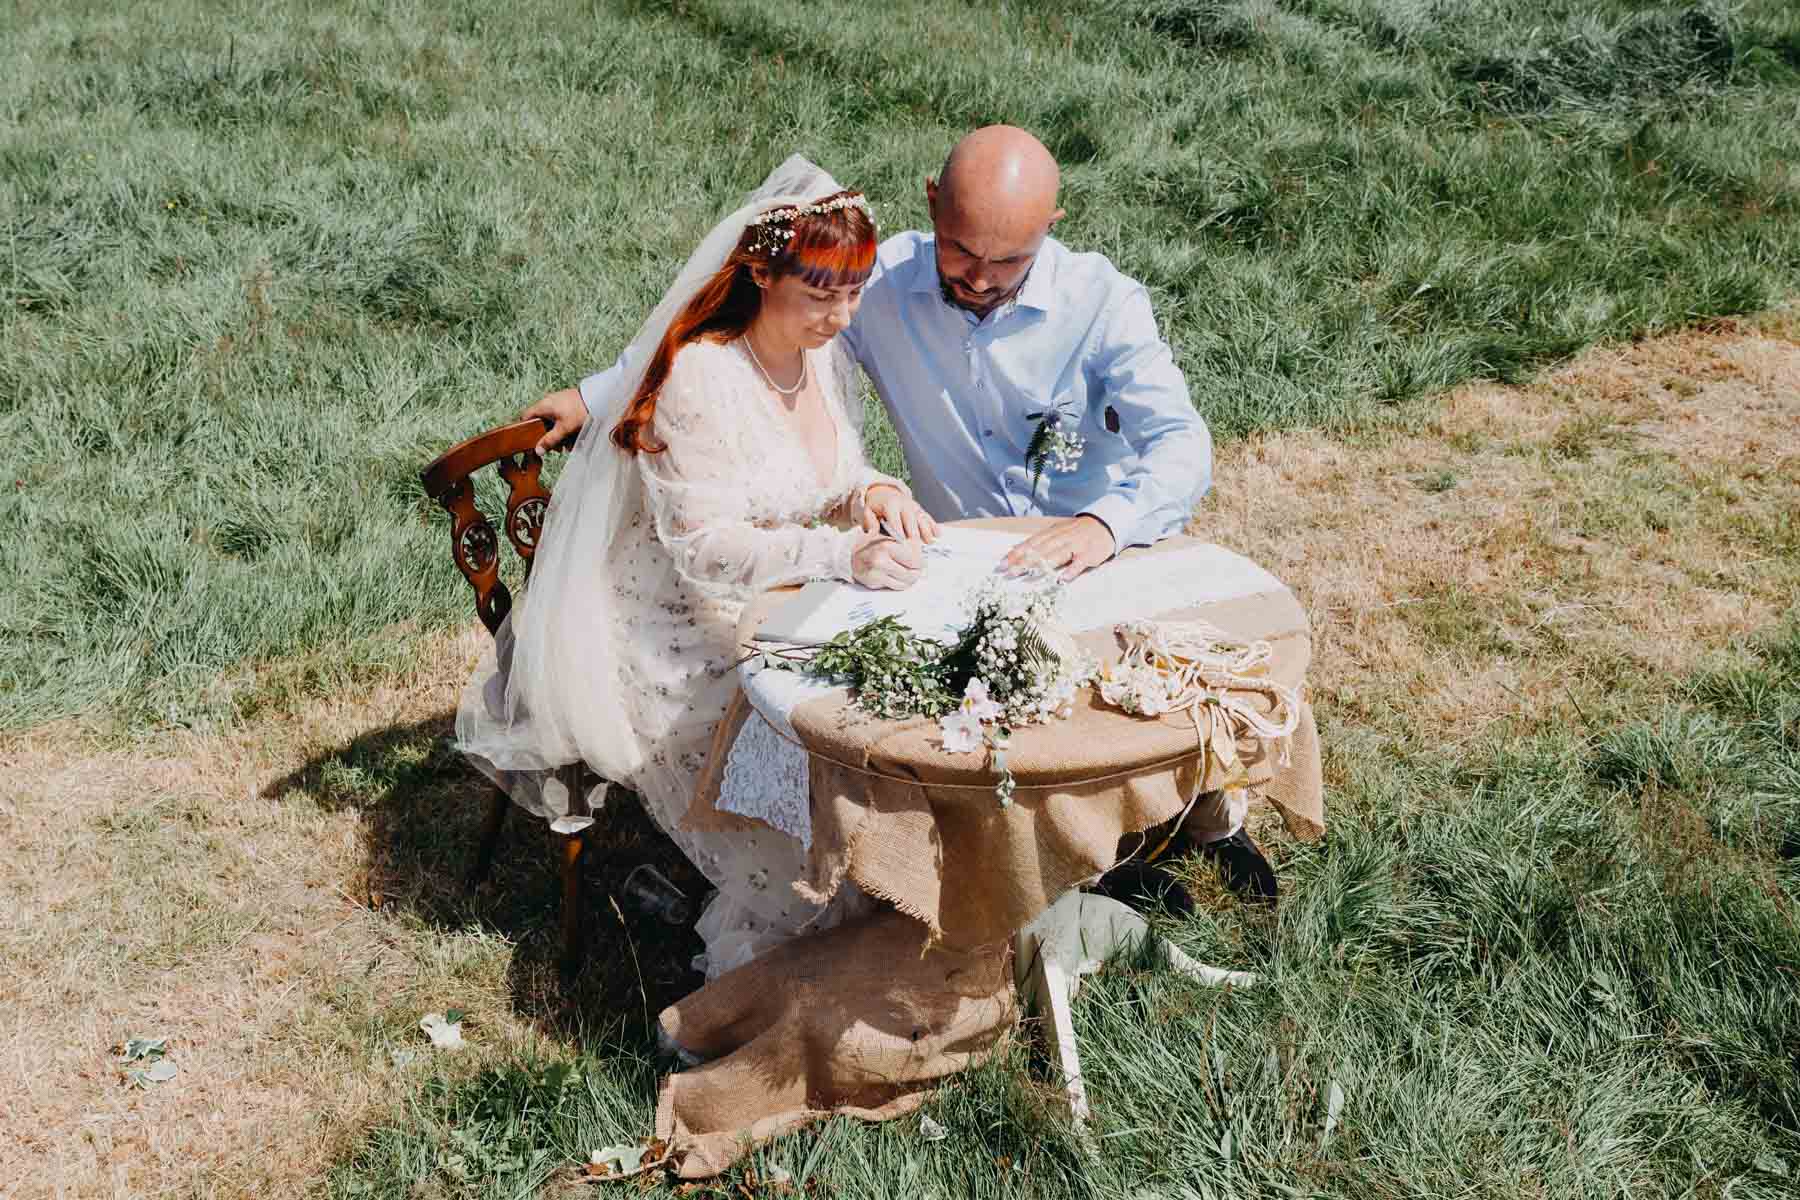 The bride and groom sign documents lying on a table standing in a meadow